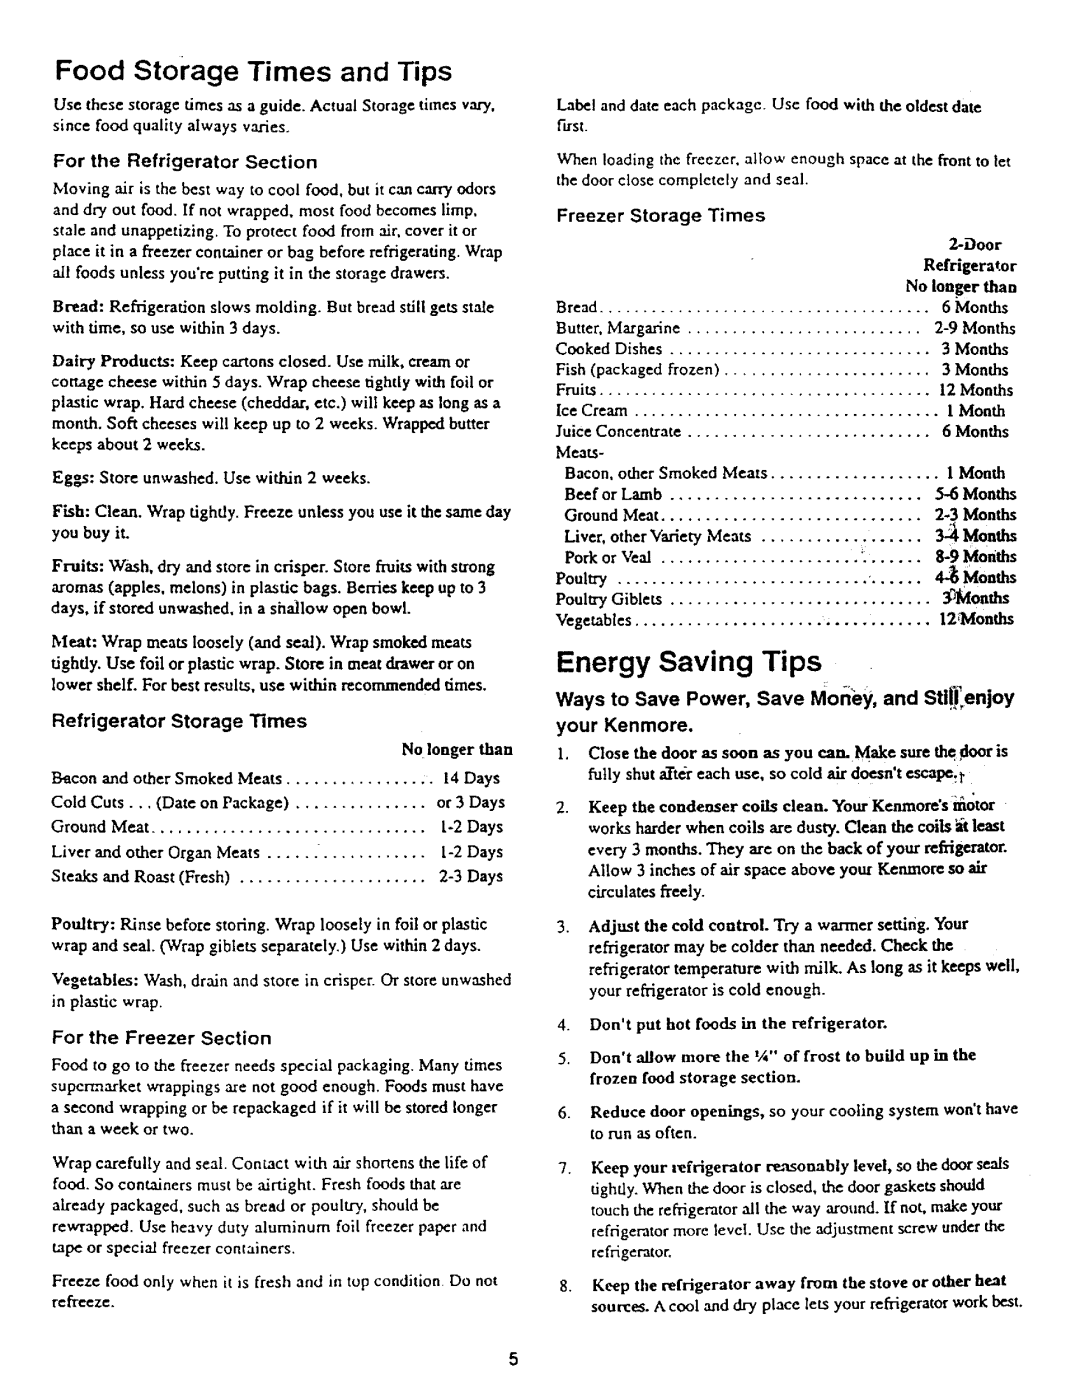 Kenmore 61040, 61044 Energy Saving Tips, Food storage Times and Tips, Ways to Save Power, Save Money, and St|i_,enjoy 